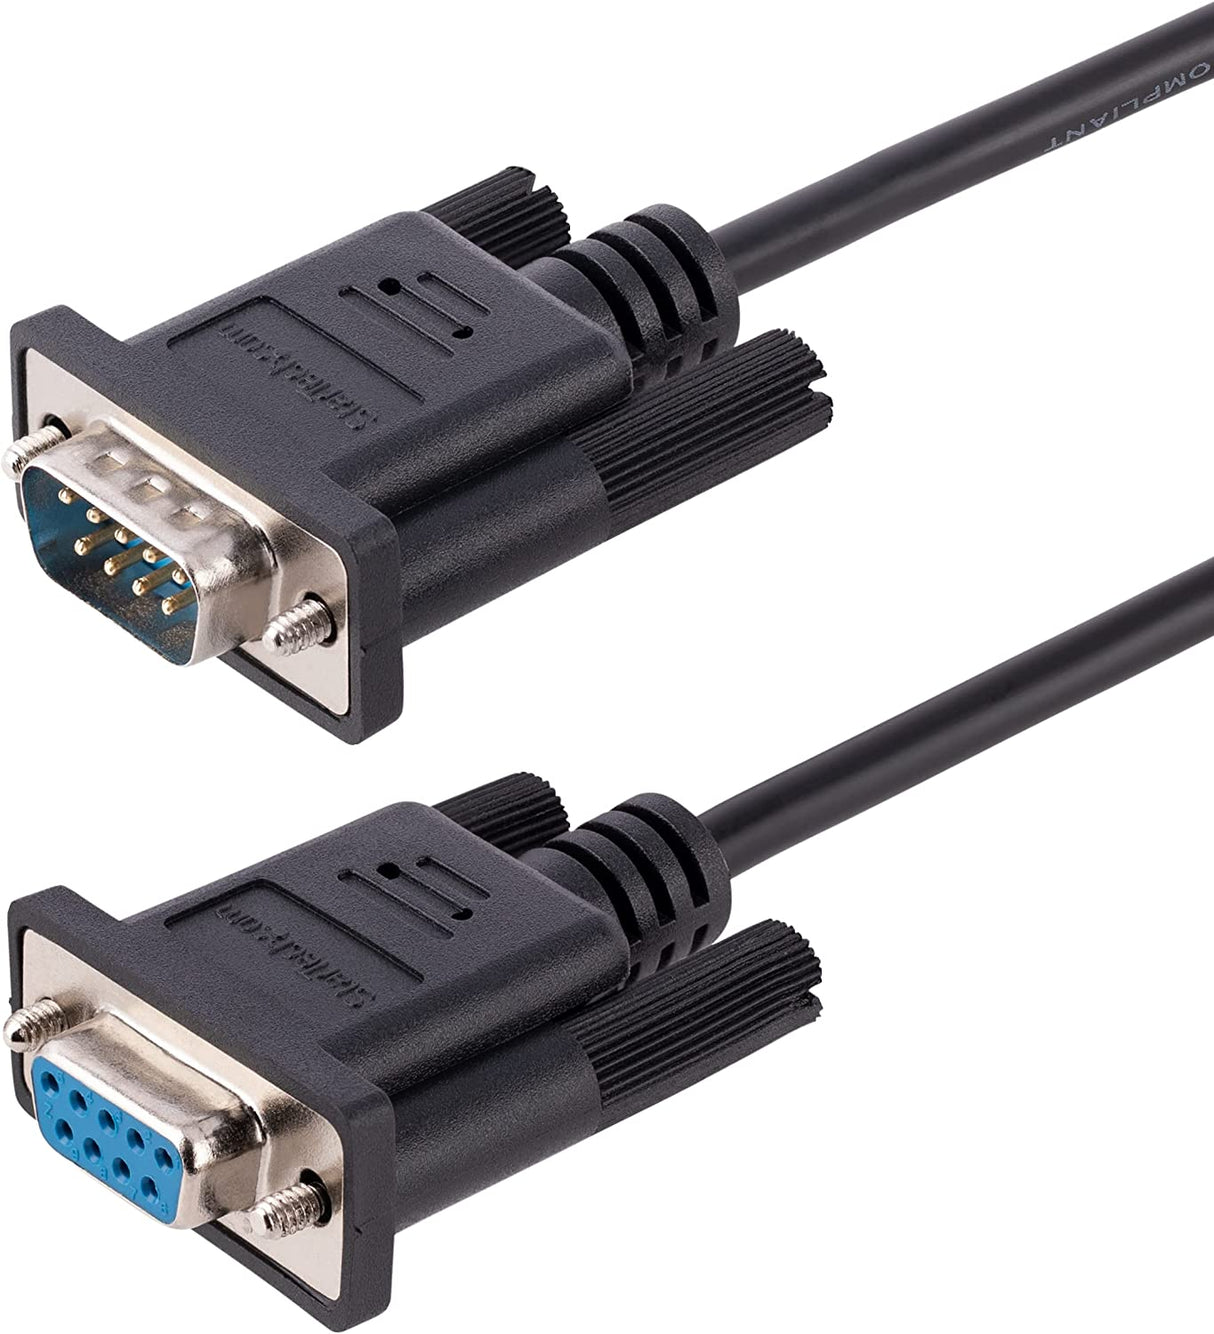 StarTech.com 3m RS232 Serial Null Modem Cable, Crossover Serial Cable w/Al-Mylar Shielding, DB9 Serial COM Port Cable Female to Male, Compatible w/DTE Devices, Black, F/M (9FMNM-3M-RS232-CABLE)